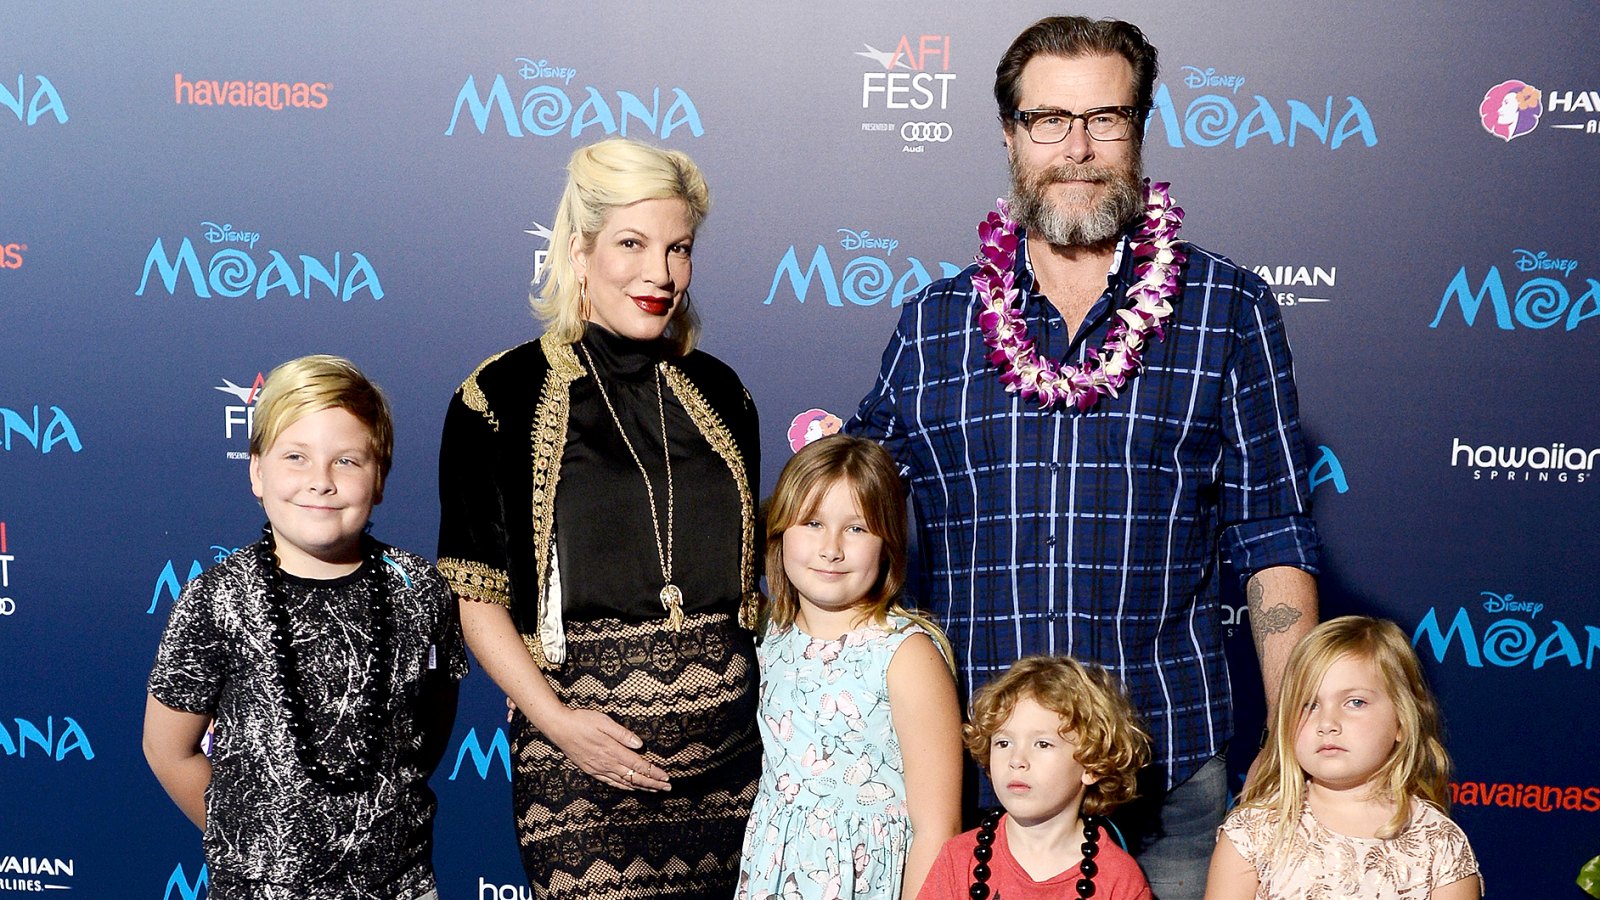 Liam McDermott, actress Tori Spelling, Stella McDermott, actor Dean McDermott, Finn McDermott and Hattie McDermott arrive at the AFI FEST 2016 Presented By Audi premiere of Disney's "Moana" at the El Capitan Theatre on November 14, 2016 in Hollywood, California.